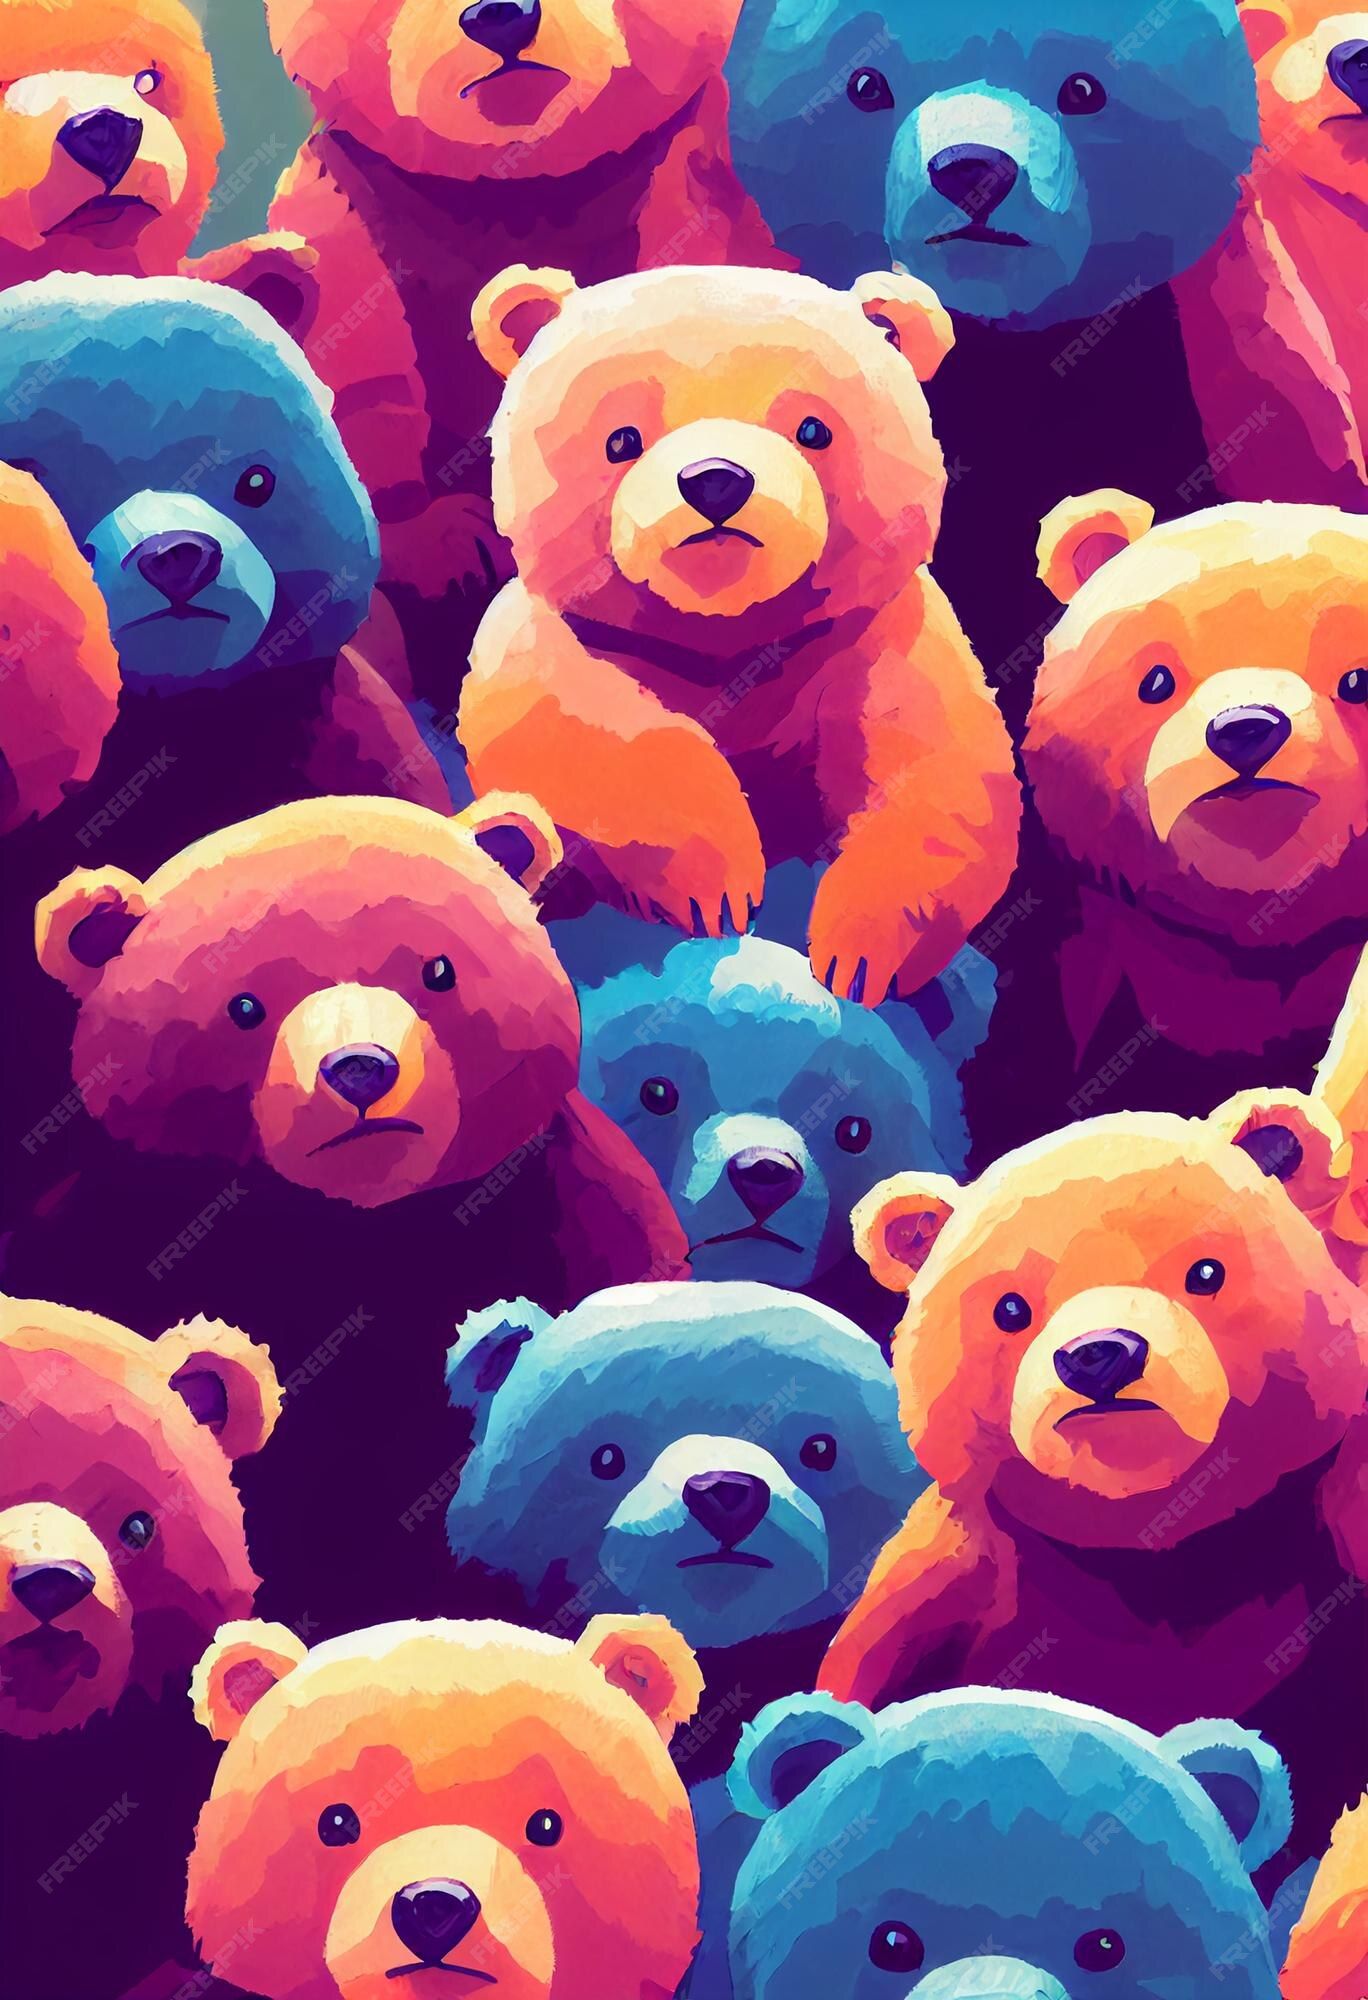 A pattern of colorful bears. - Teddy bear